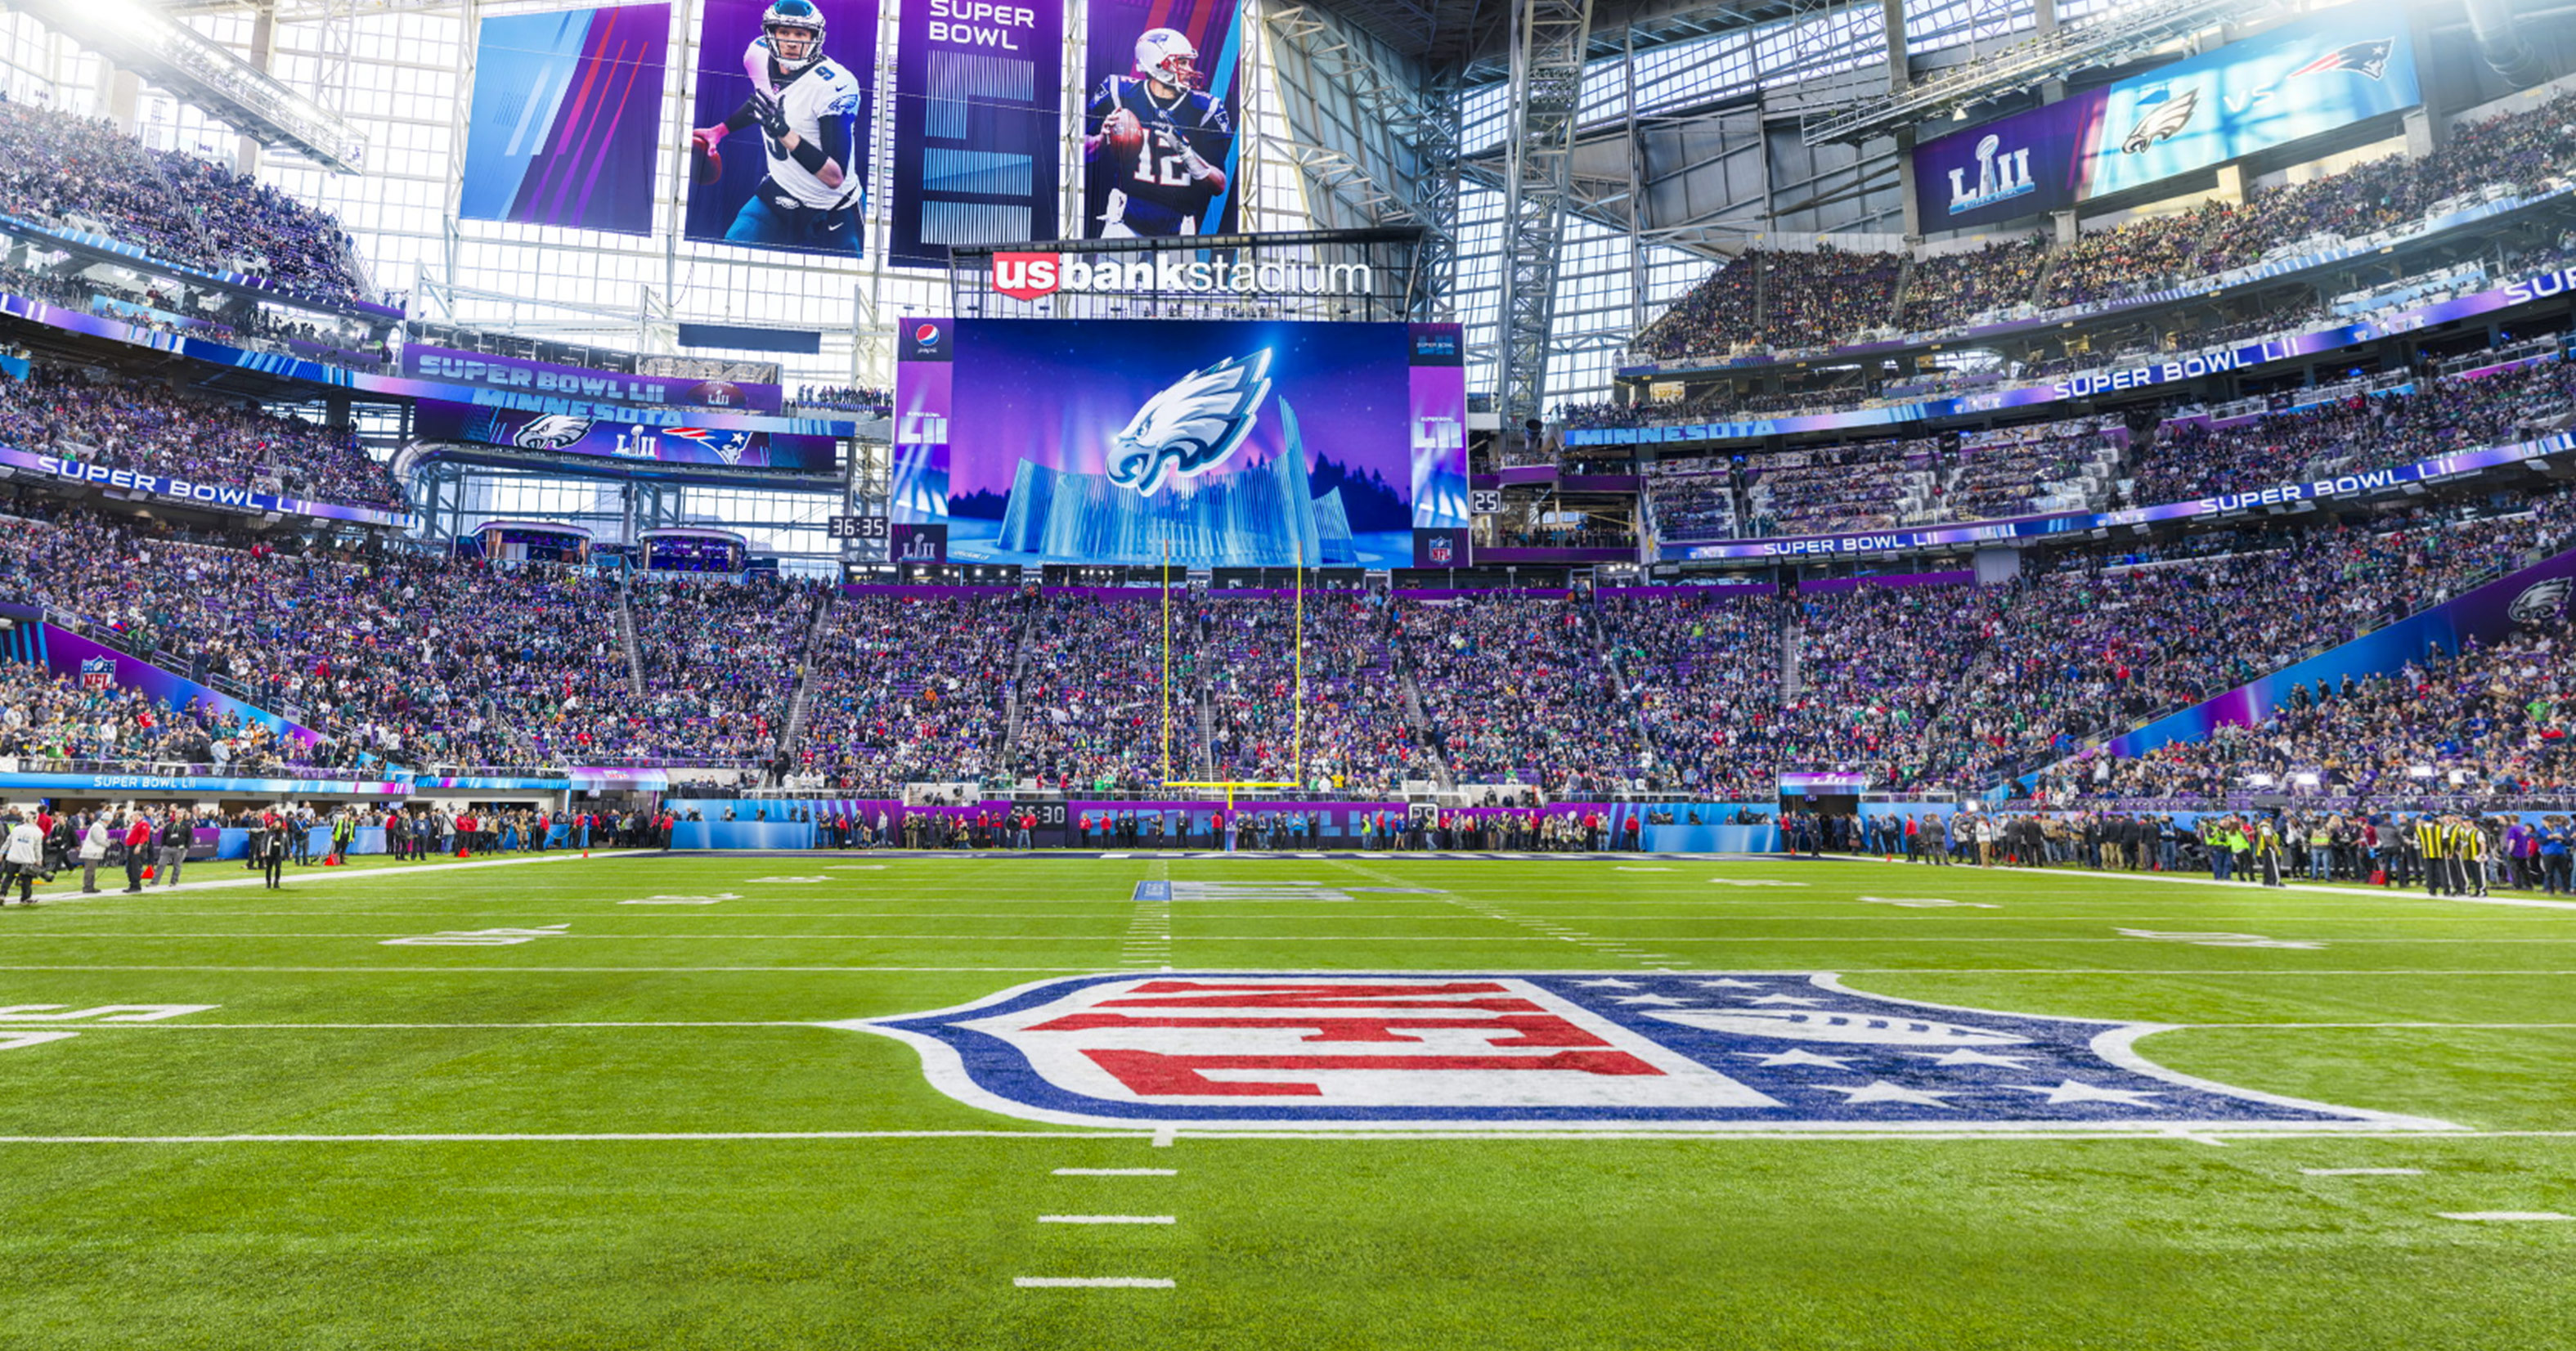 See you tomorrow welfare The sky Amazing 360° Gigapixel Photo Of Super Bowl LII Captures Every Single Fan In  Super High Definition